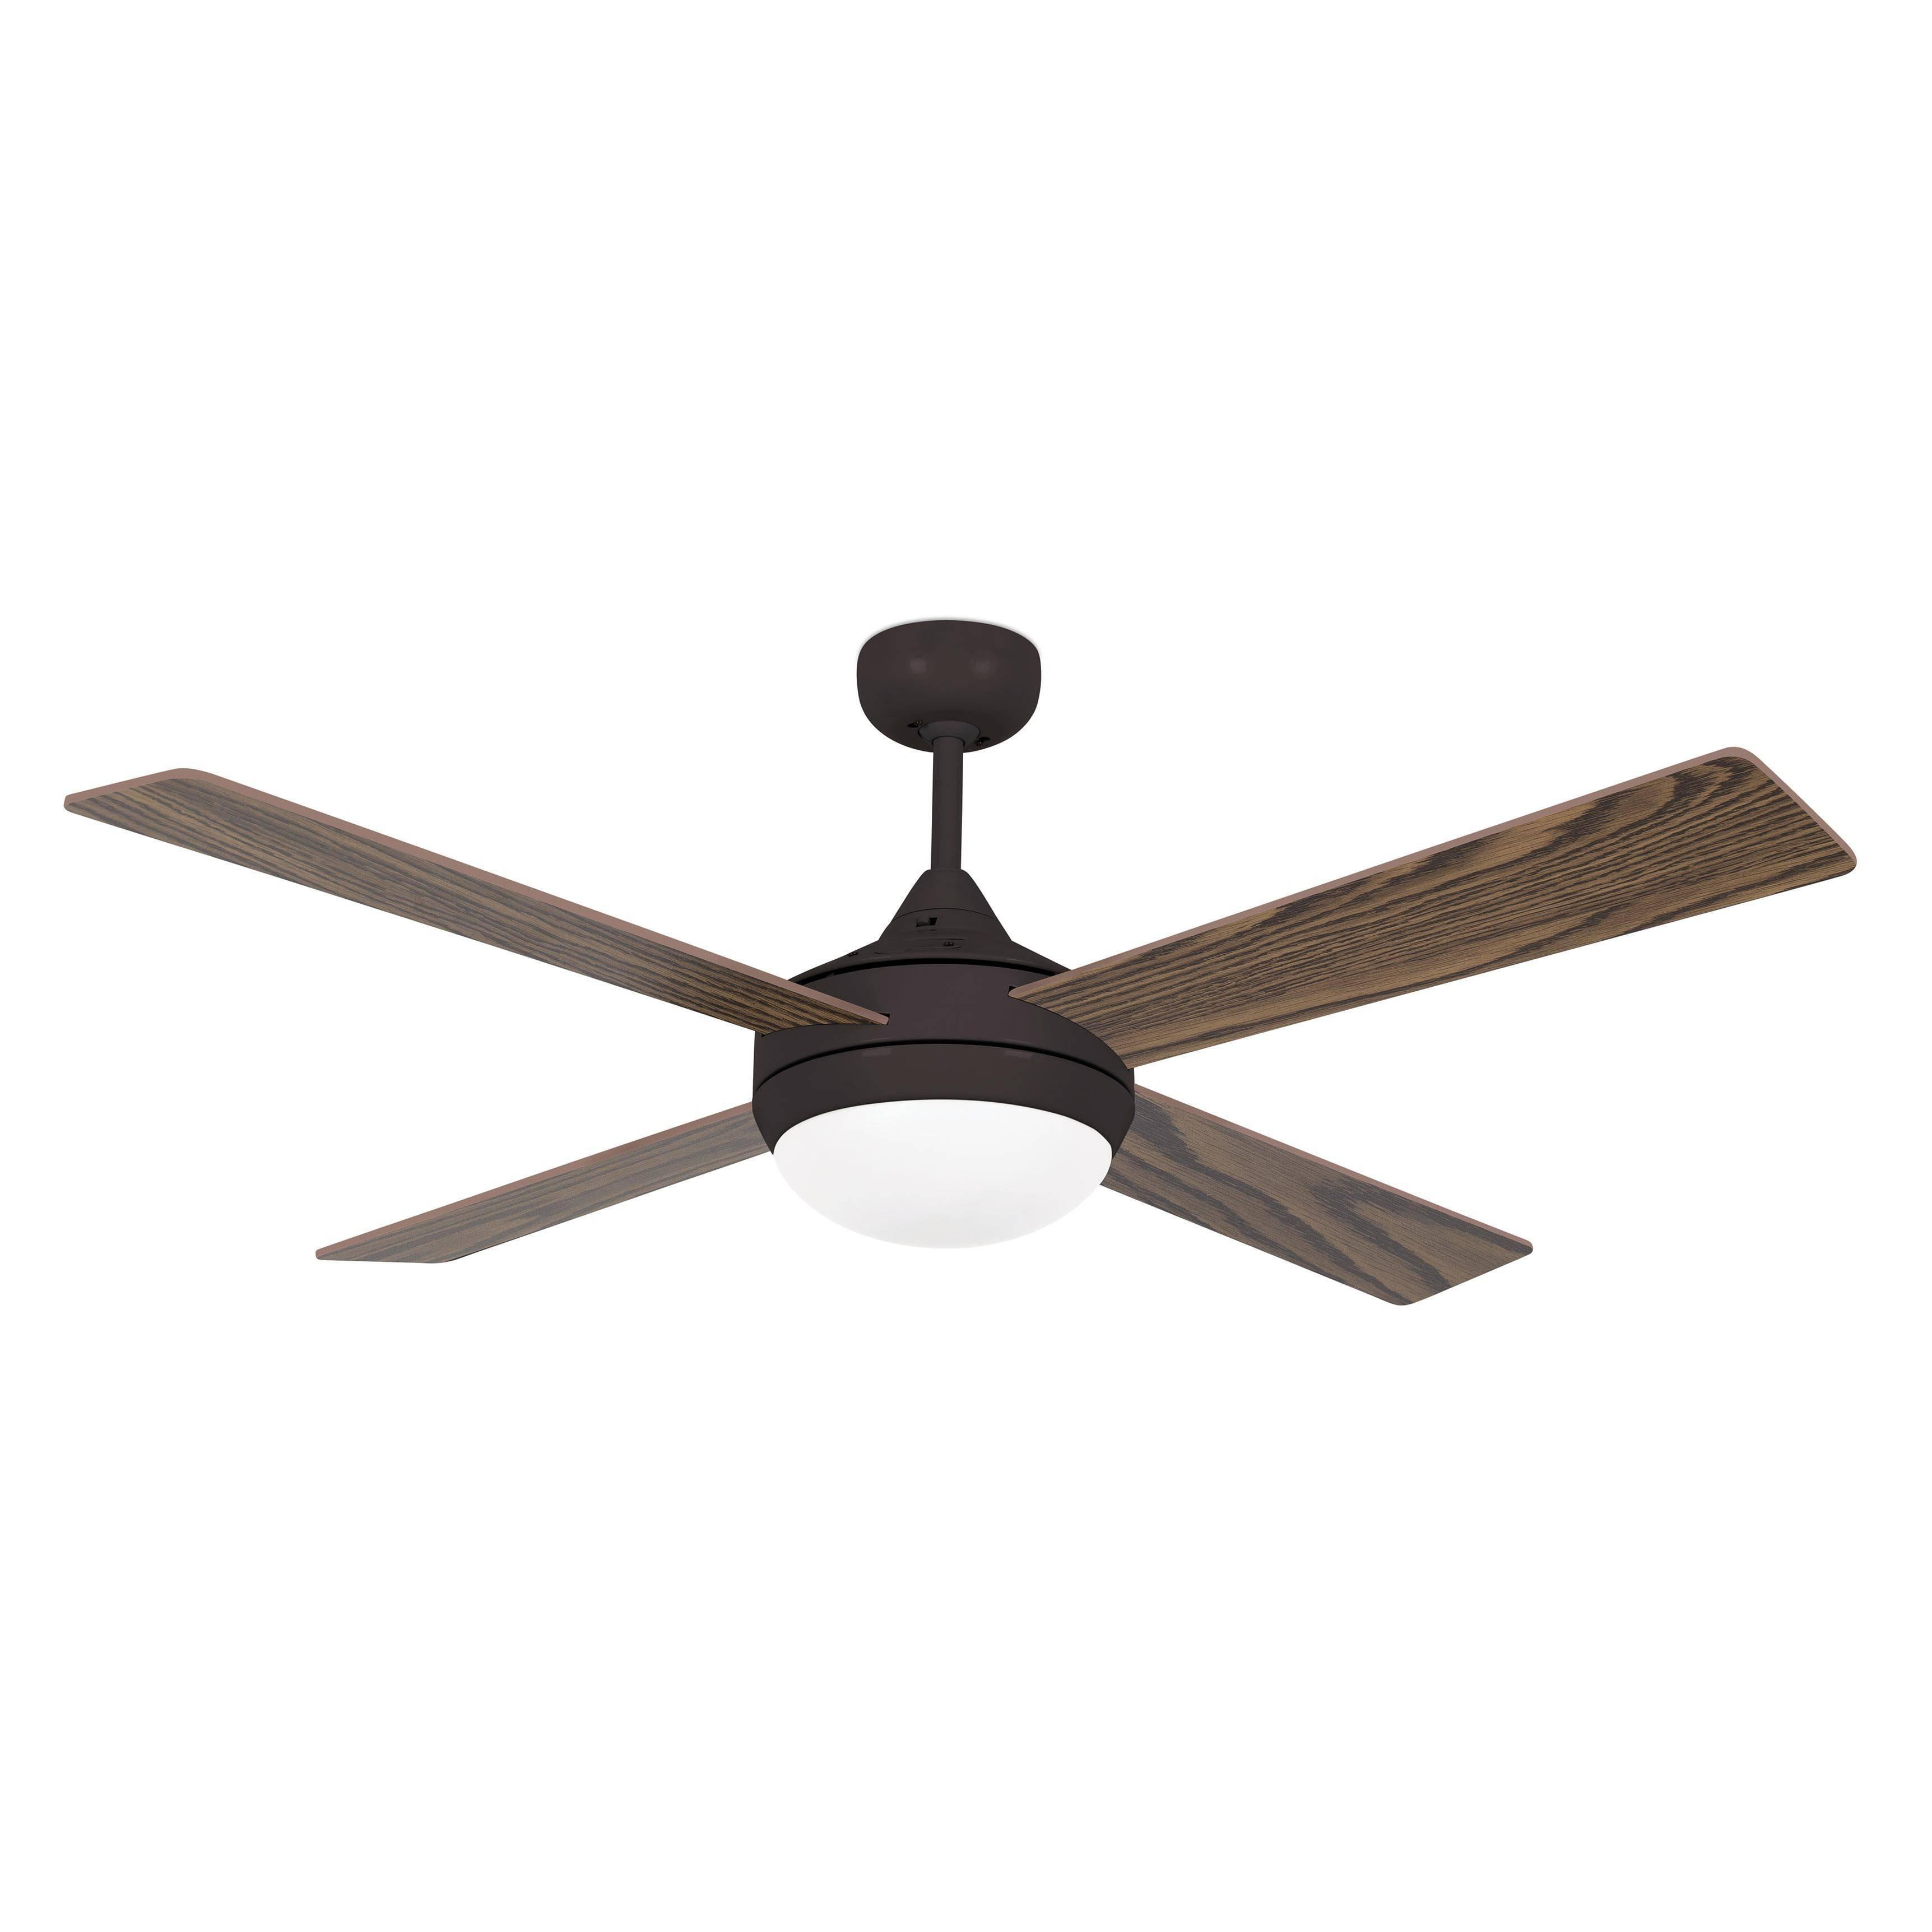 Icaria 2 Light Large Ceiling Fan Brown Mahogany with Light E27 - image 1